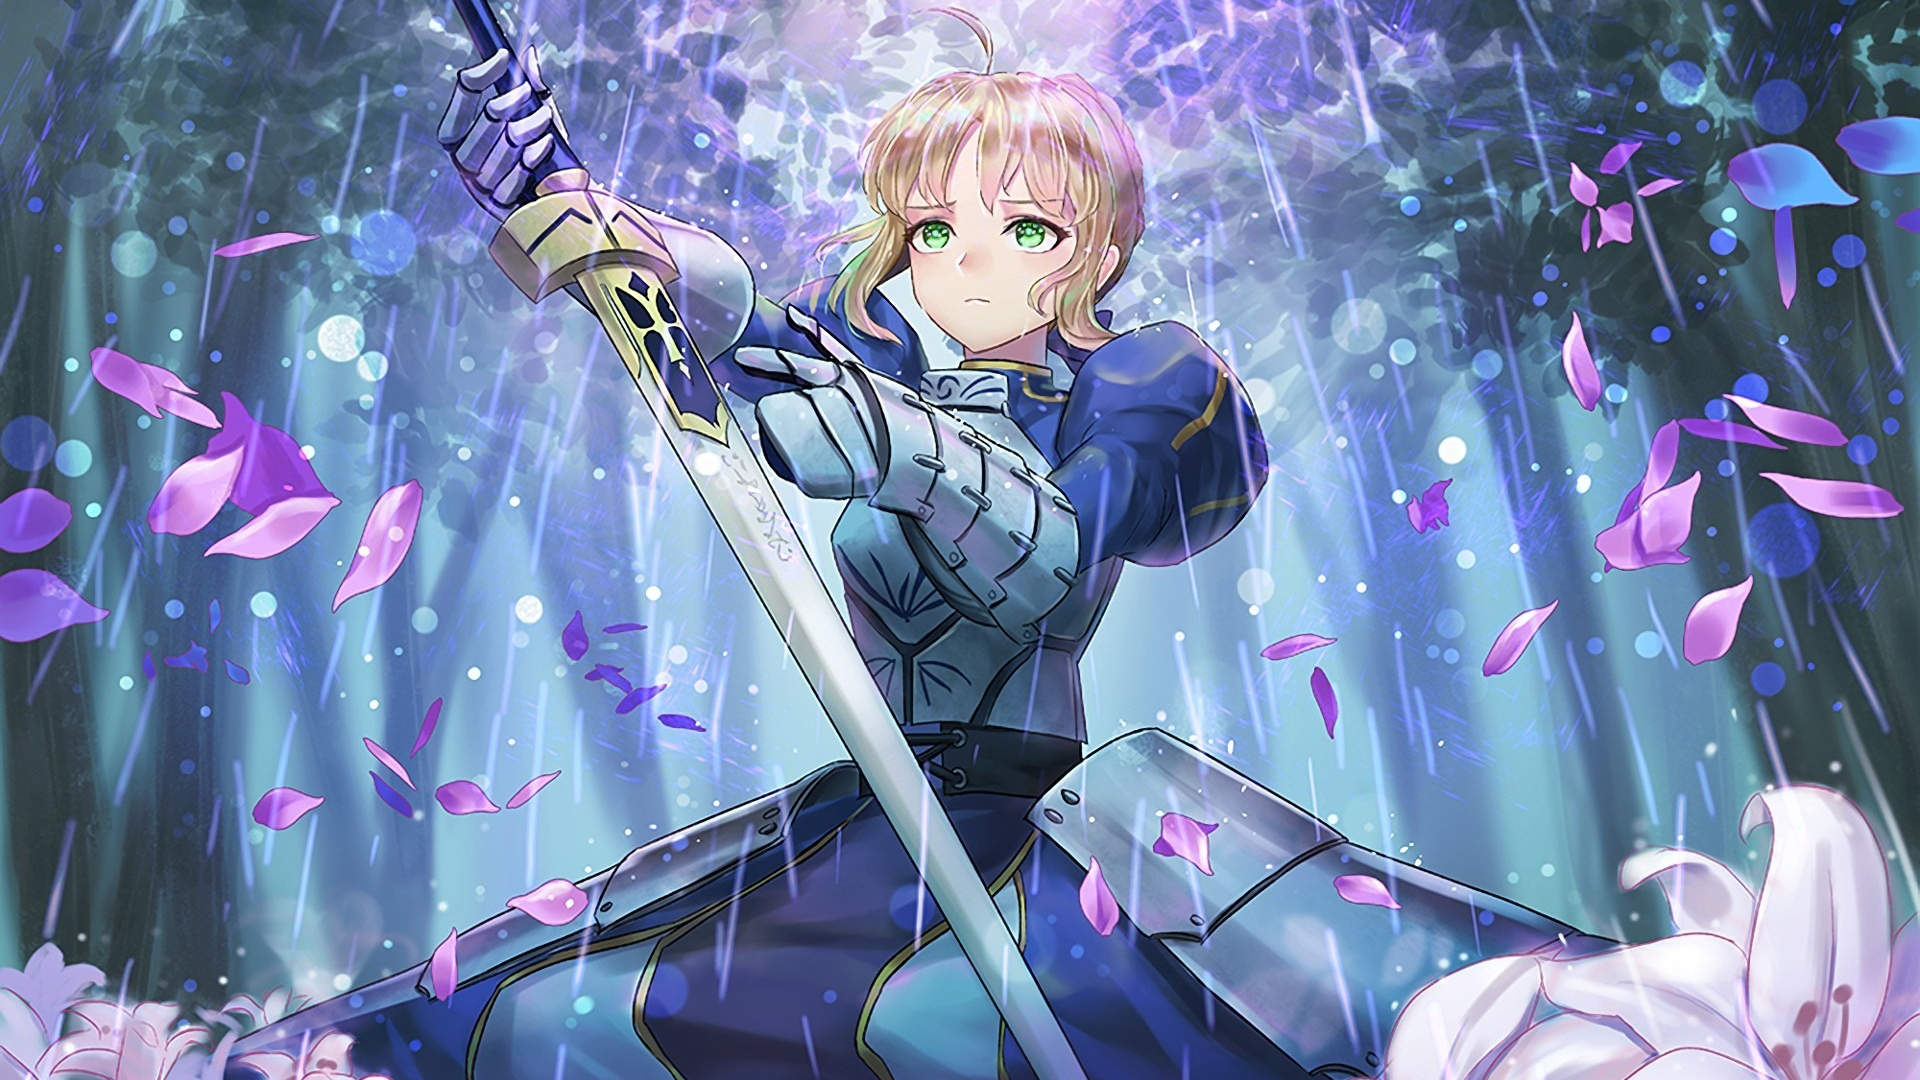 Download 19x1080 Wallpaper Blossom Anime Girl Saber Fate Grand Order Full Hd Hdtv Fhd 1080p 19x1080 Hd Image Background 26